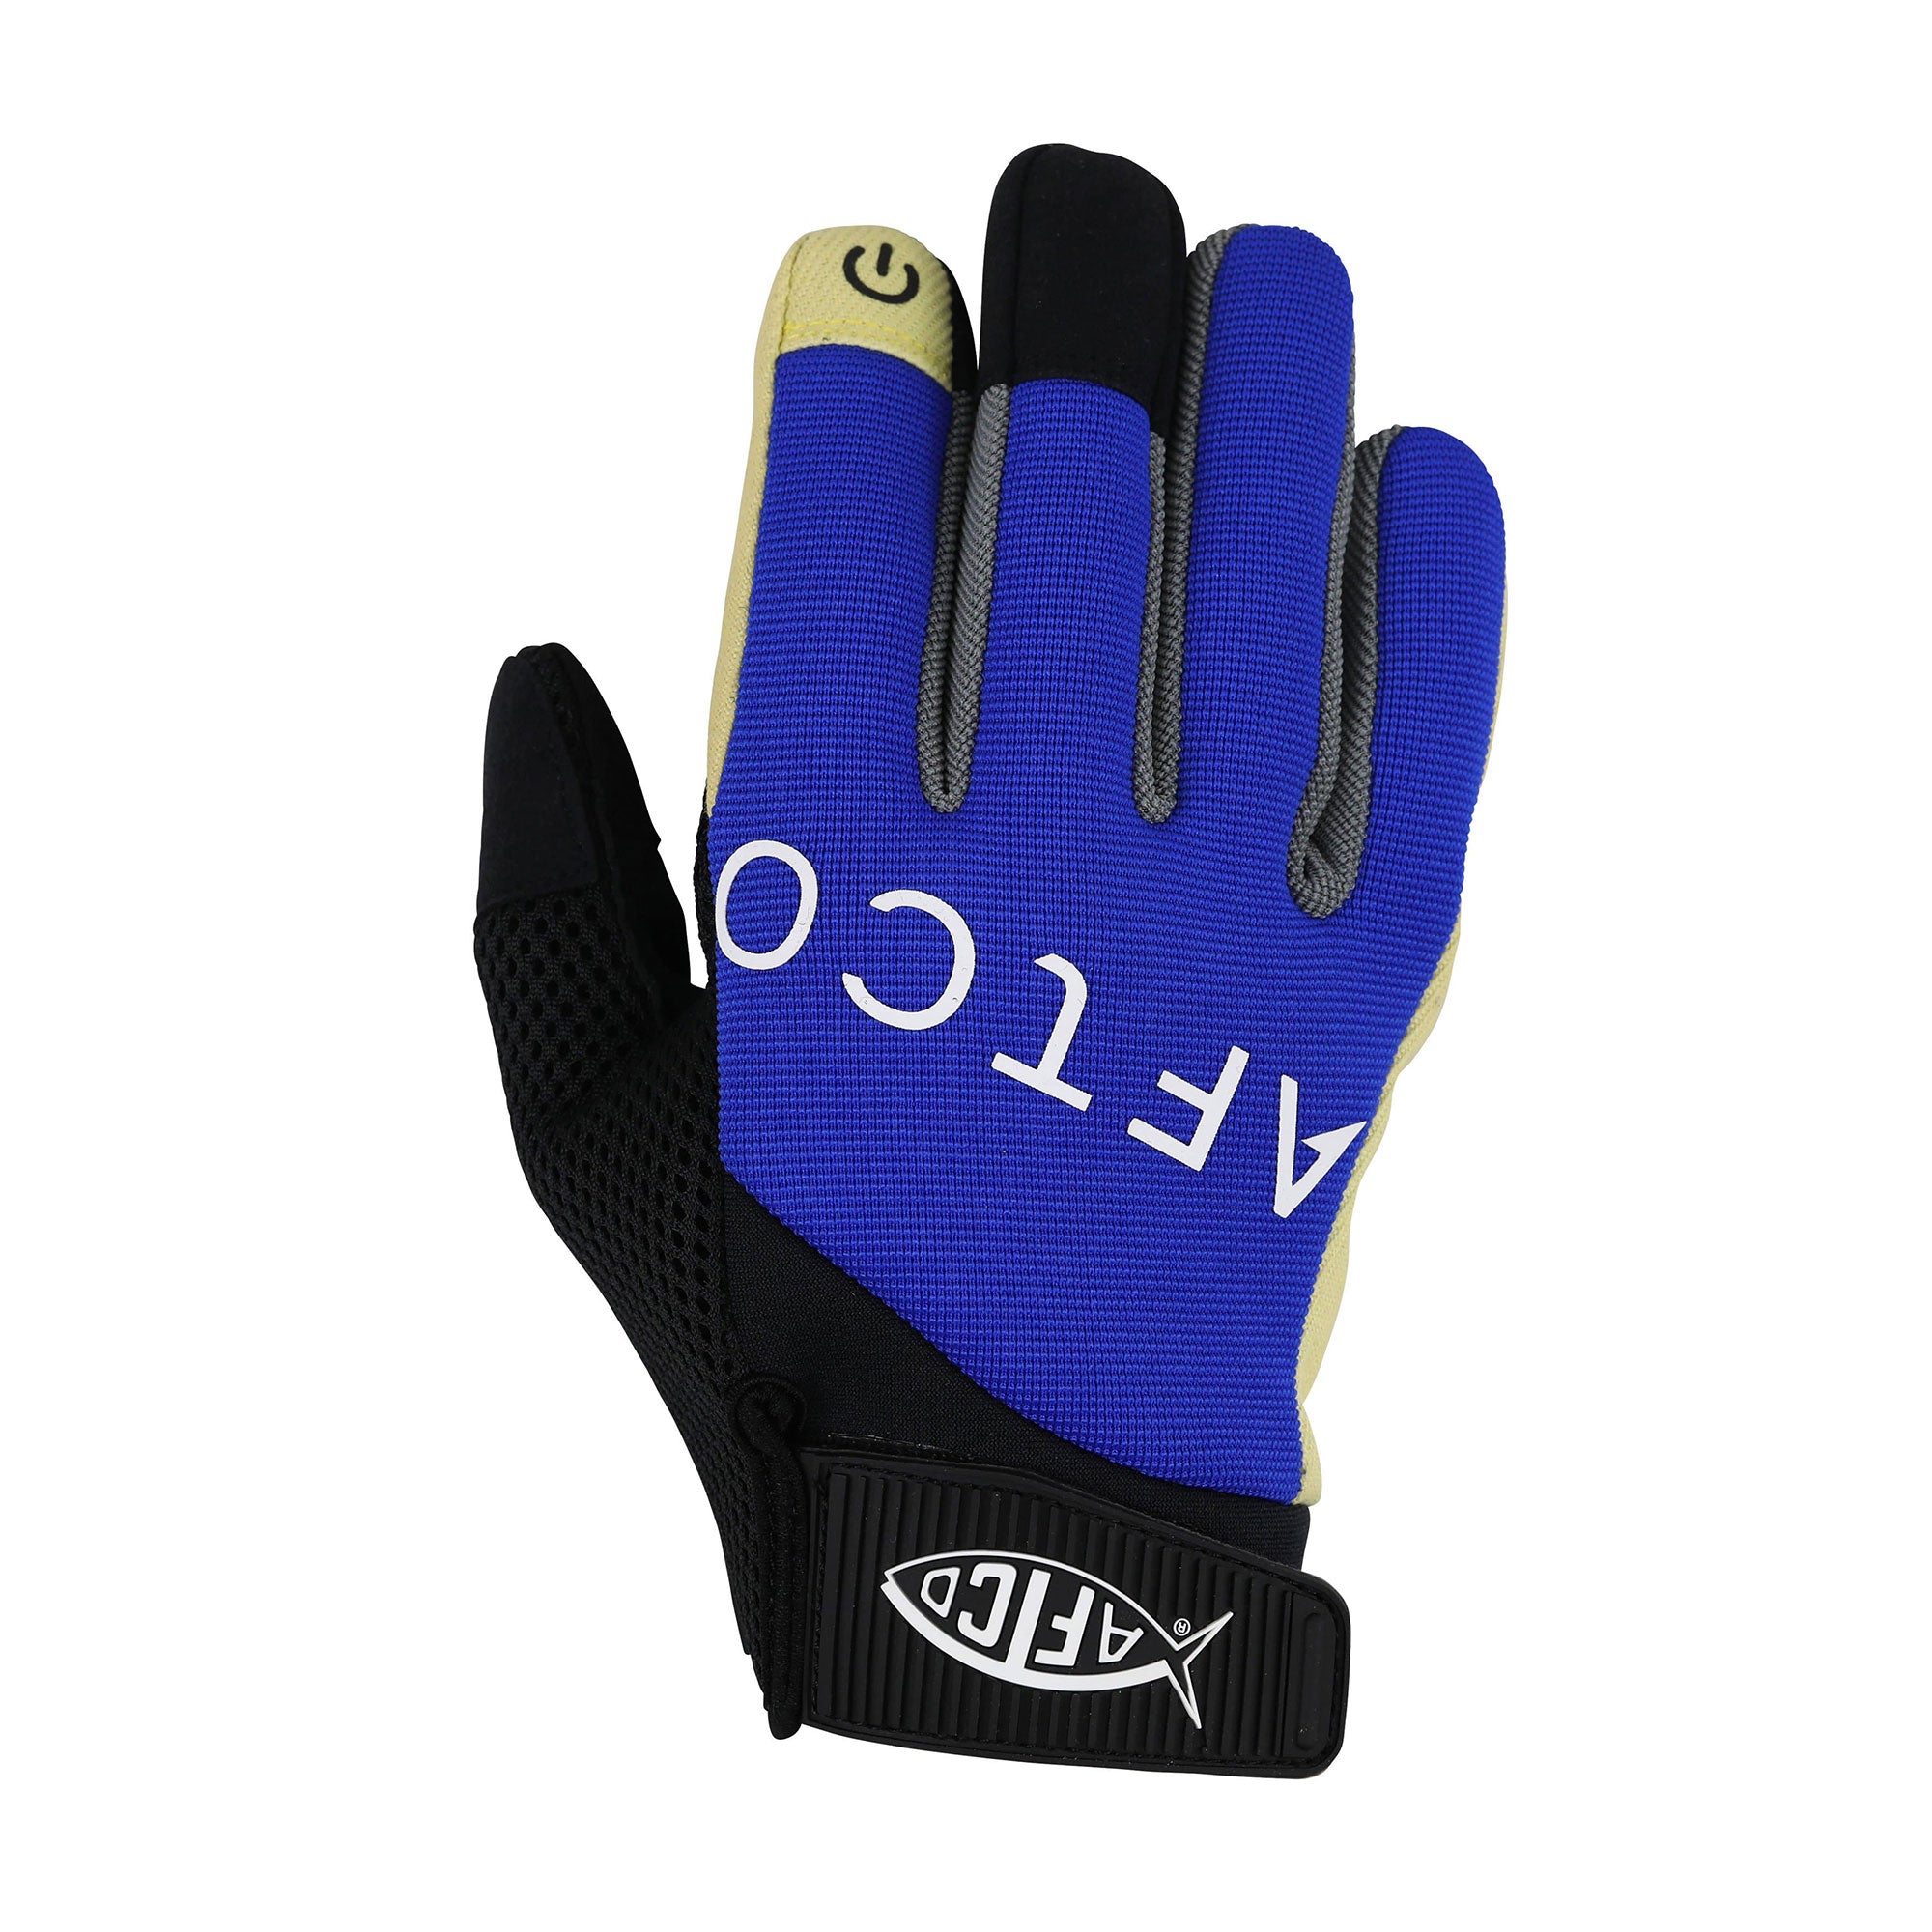 Fishing Gloves You Need to Have